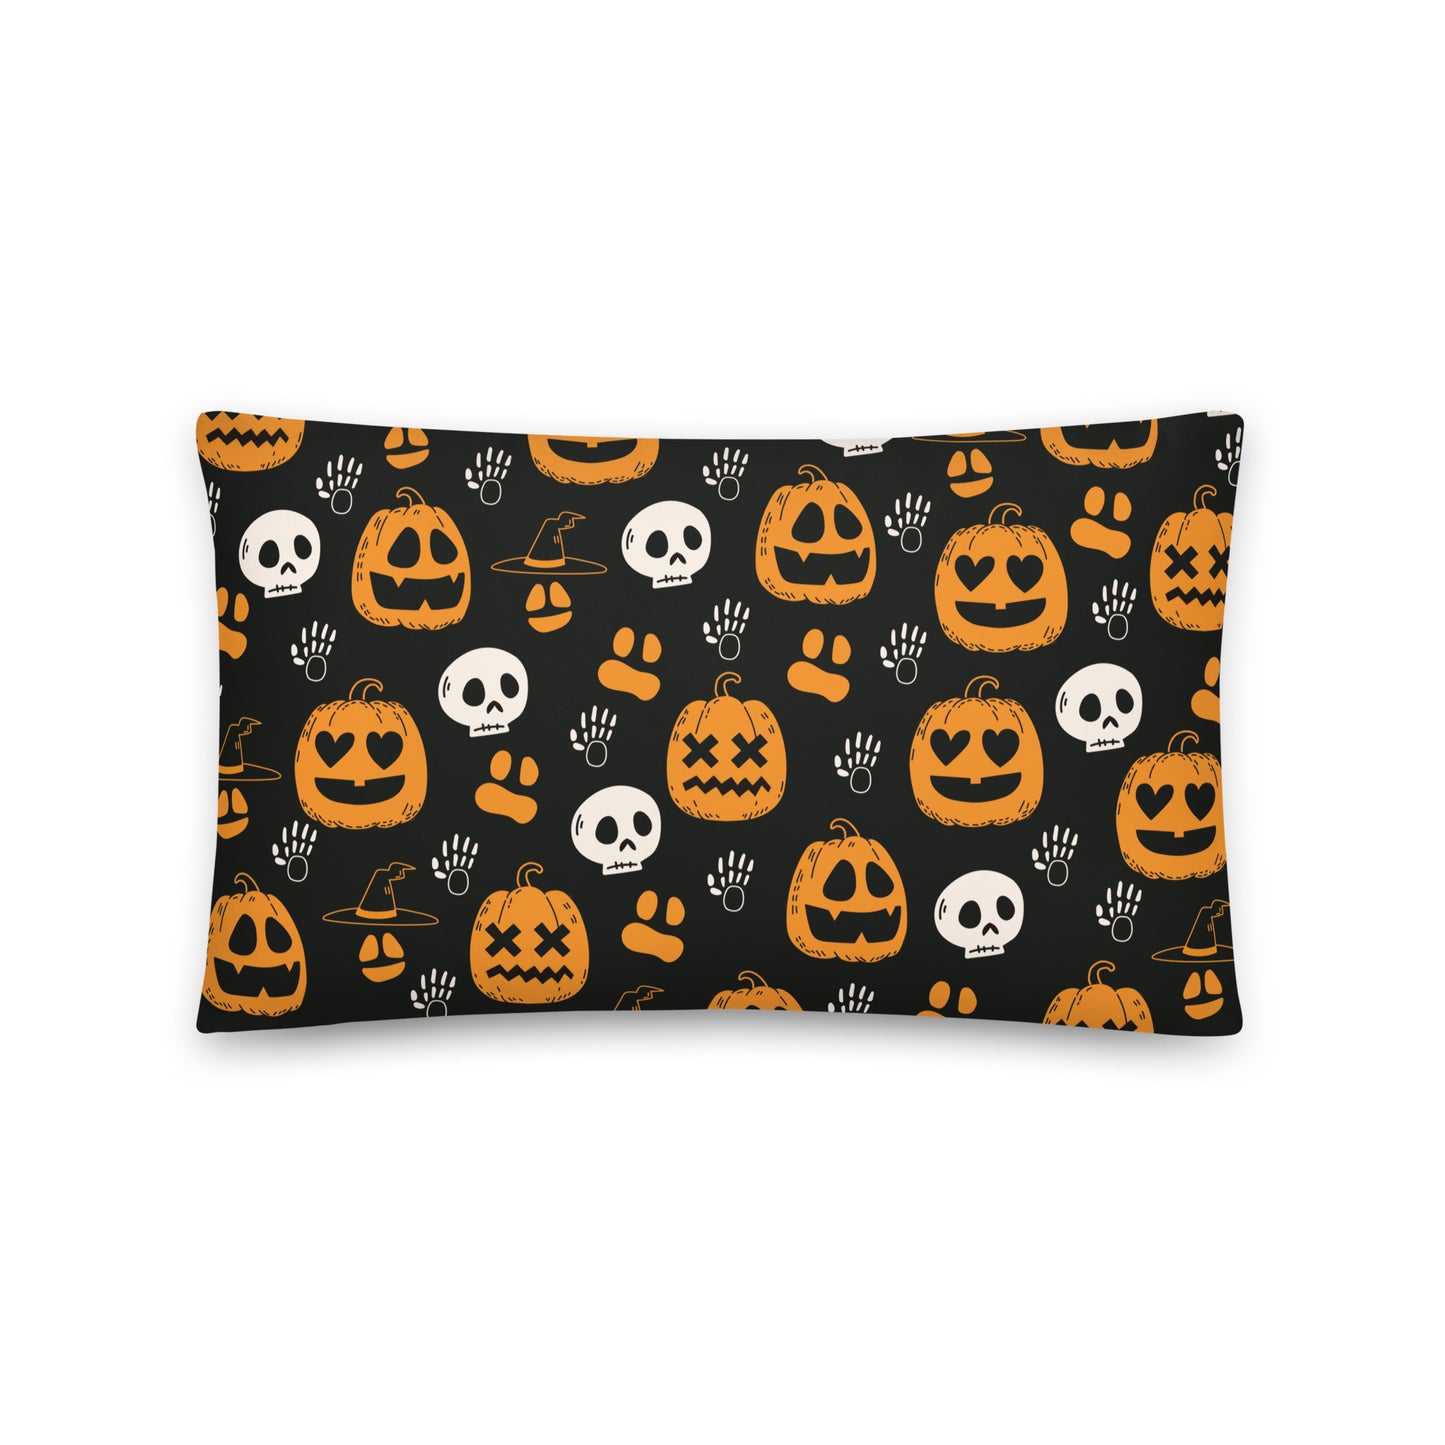 Helloween - Sustainably Made Pillows